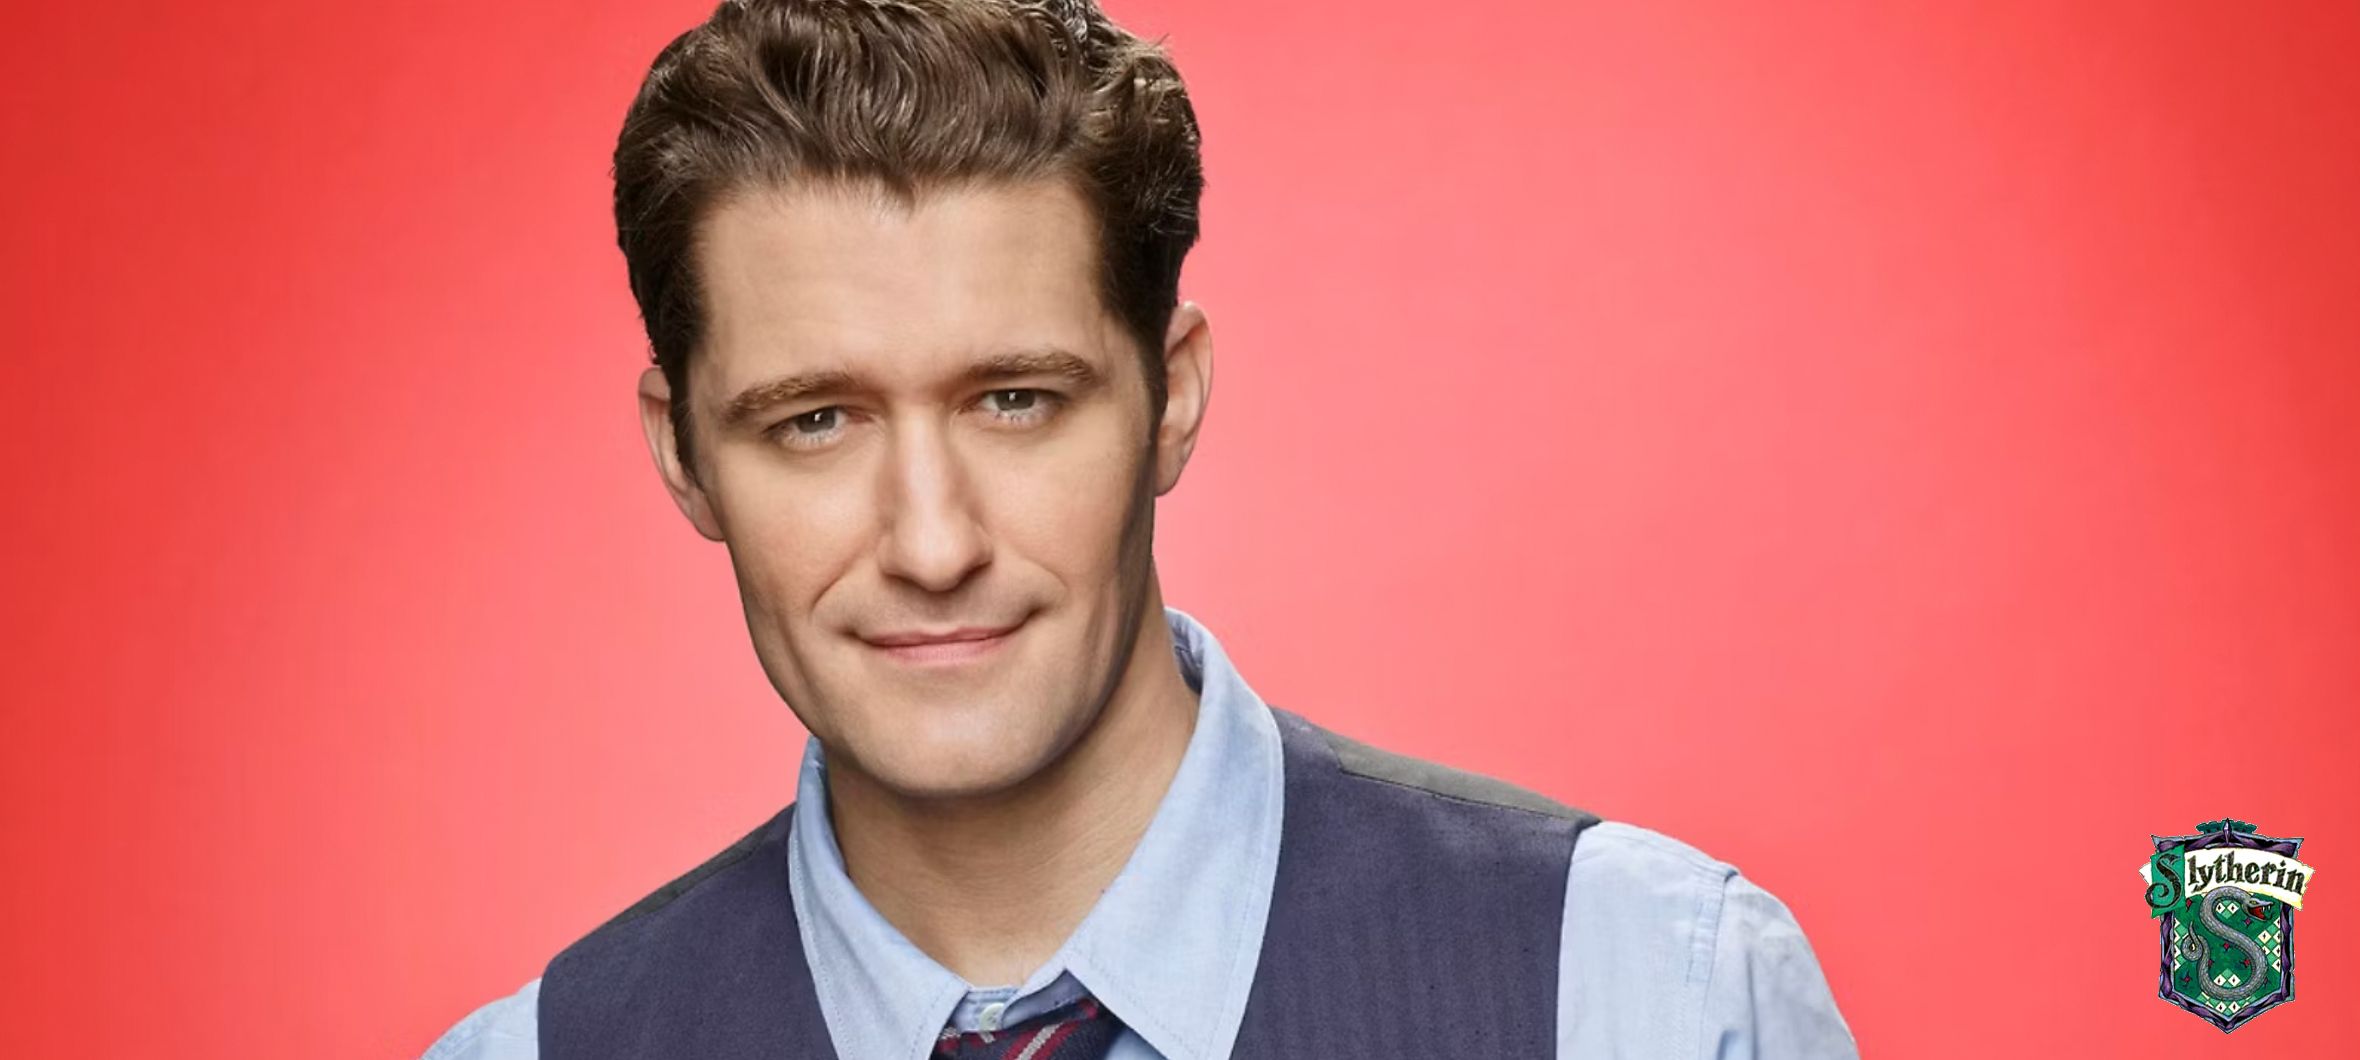 An image of Will Schuester for Glee with the Hogwarts Slytherin crest in the lower right corner